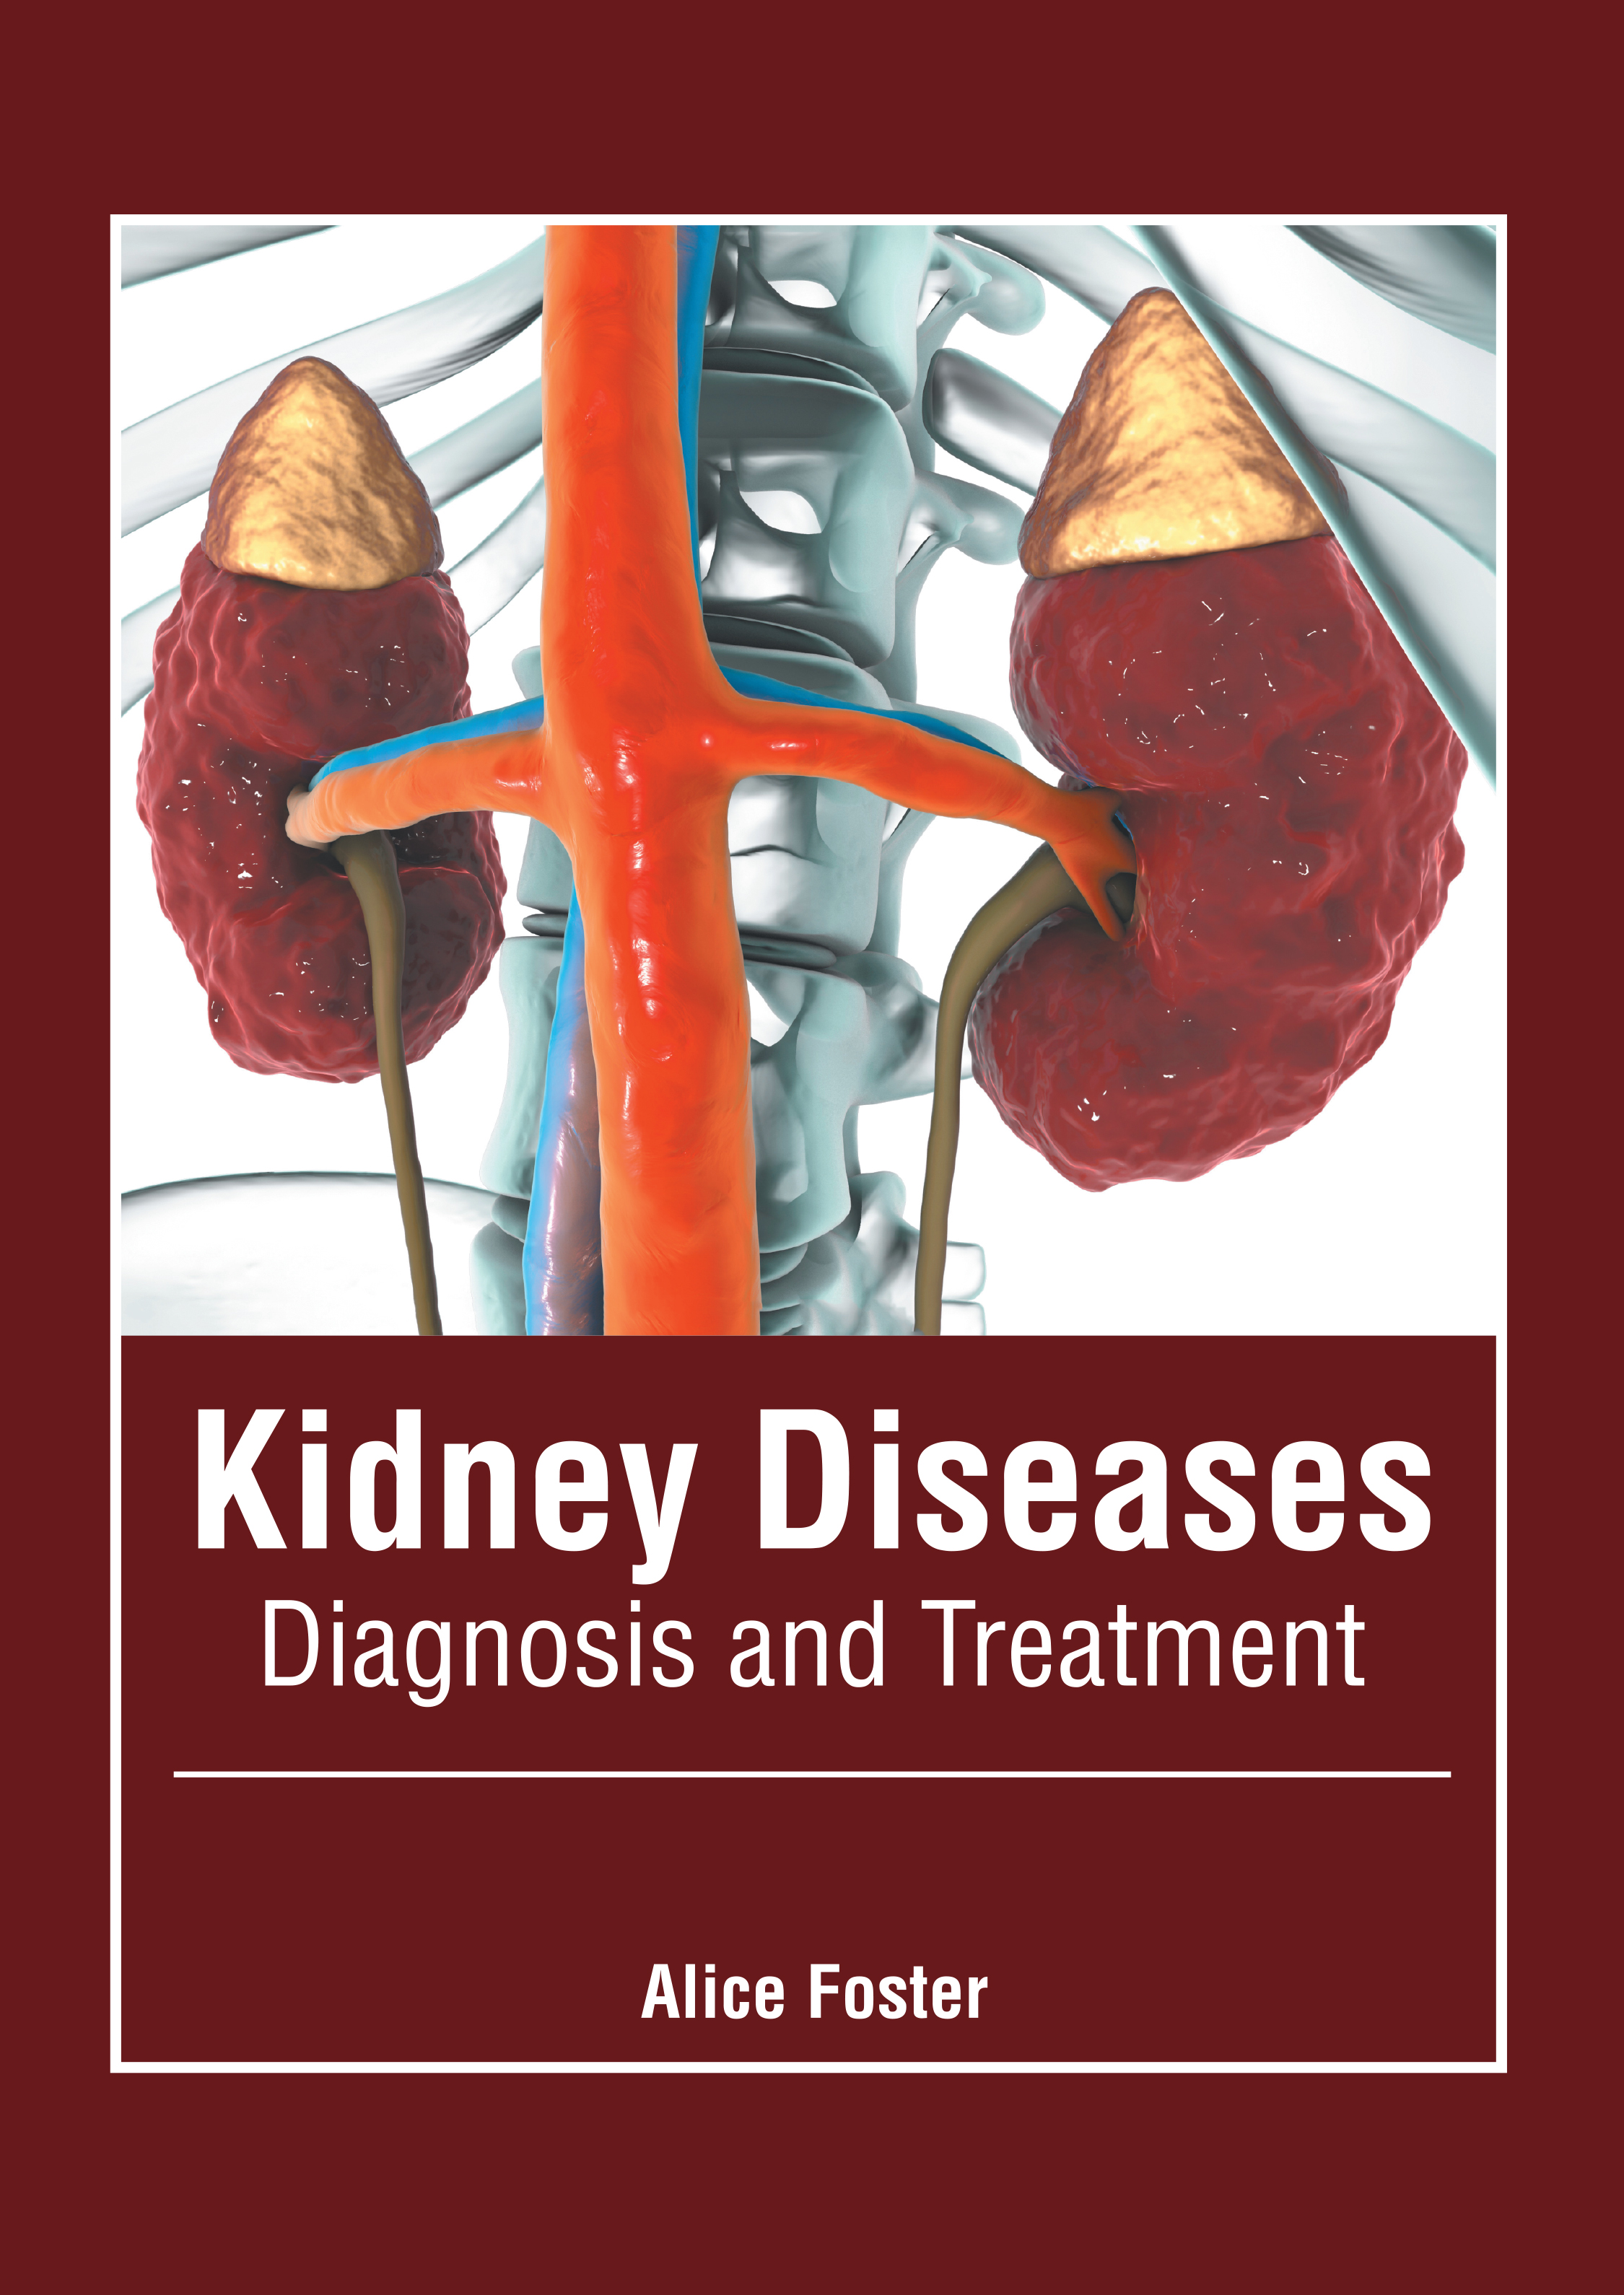 

exclusive-publishers/american-medical-publishers/kidney-diseases-diagnosis-and-treatment-9781639272716